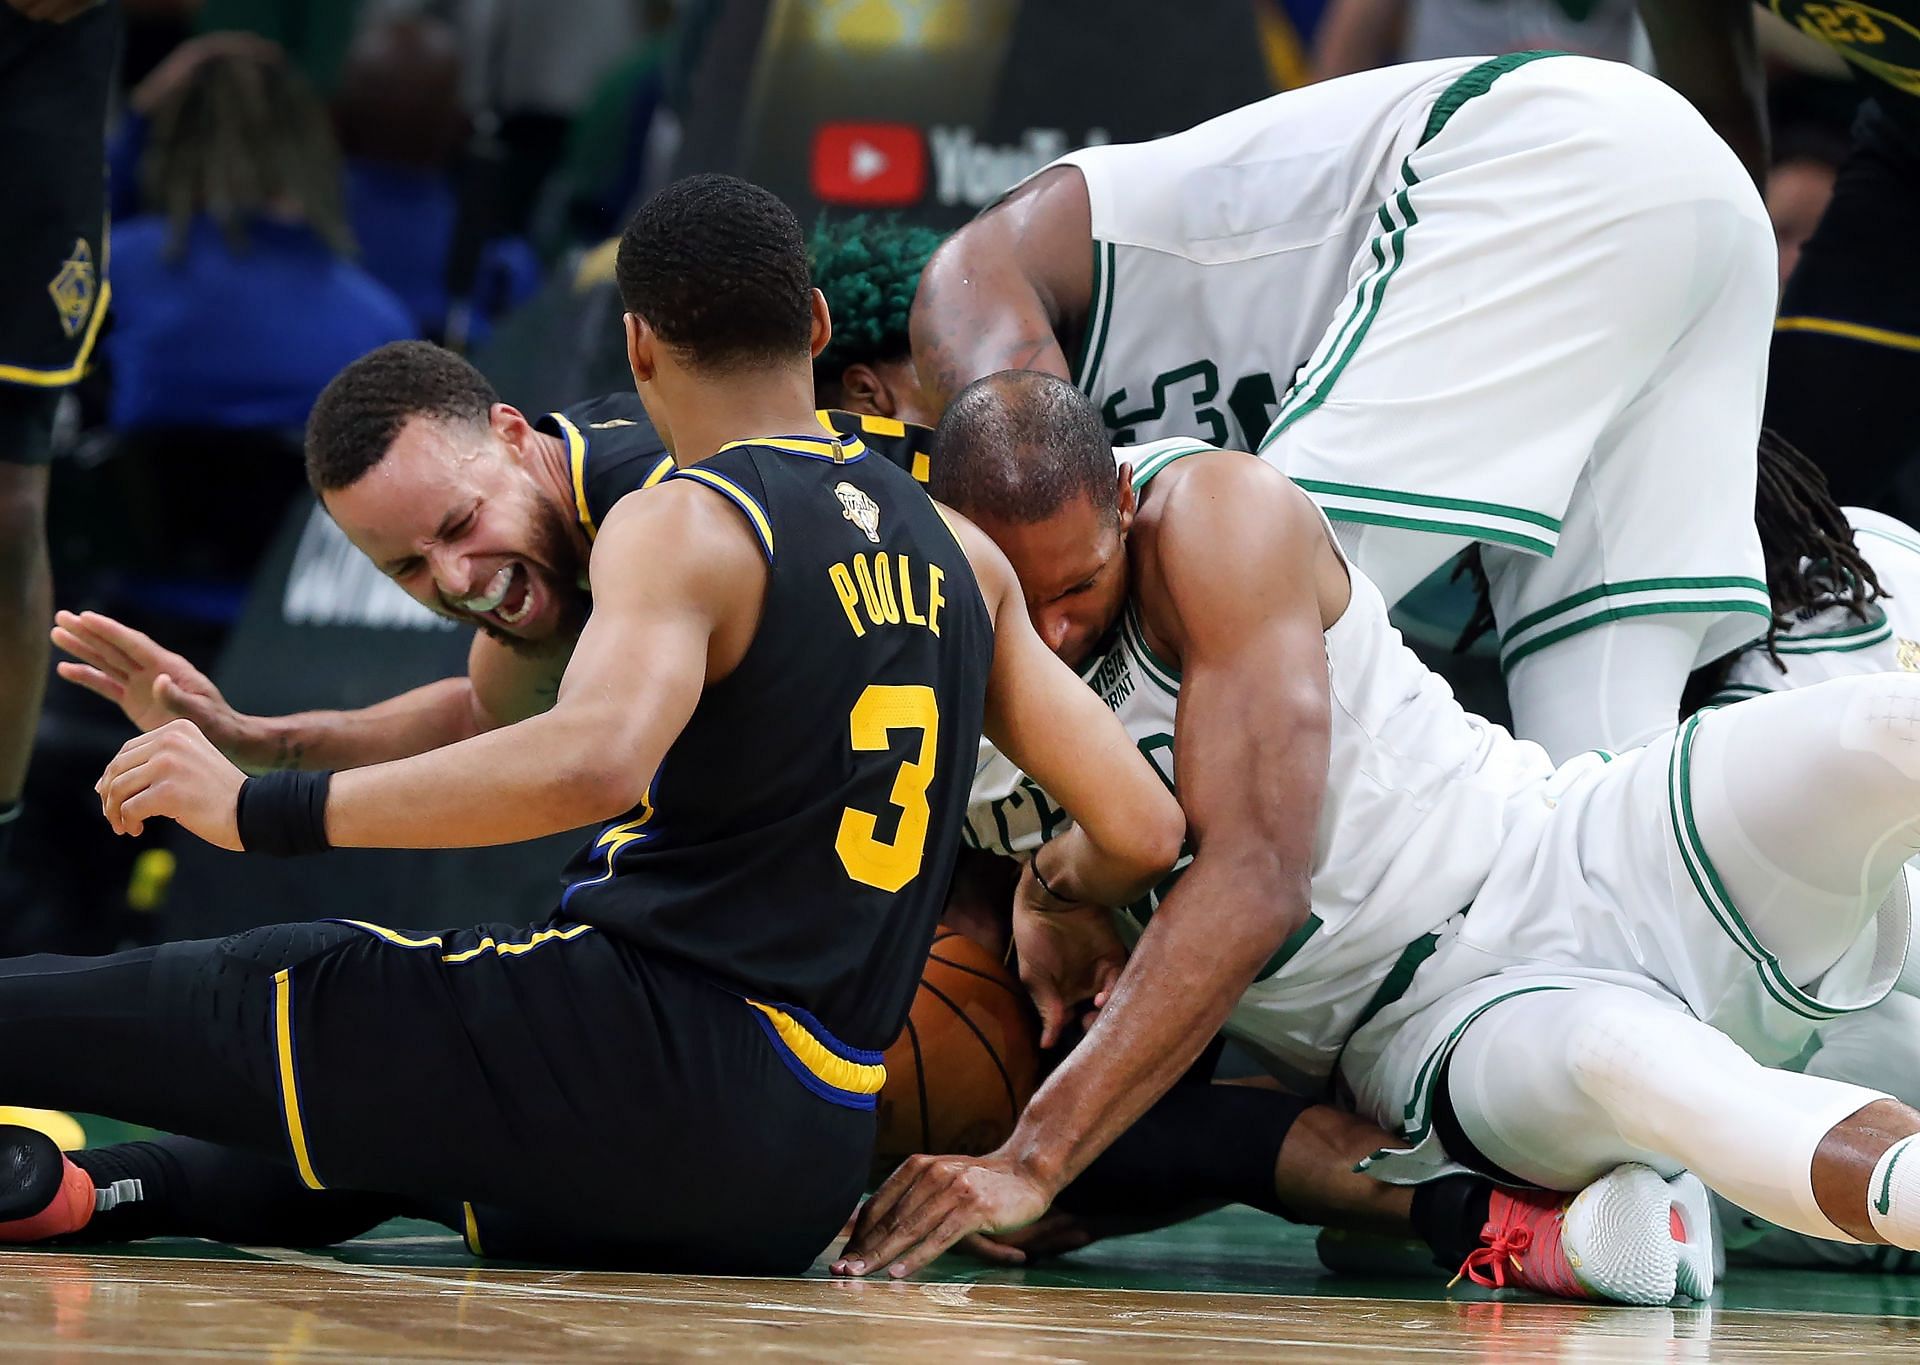 Steph Curry yelling in pain as Al Horford inadvertently sat on his ankle in Game 3 of the NBA Finals. [Photo: The Boston Globe]